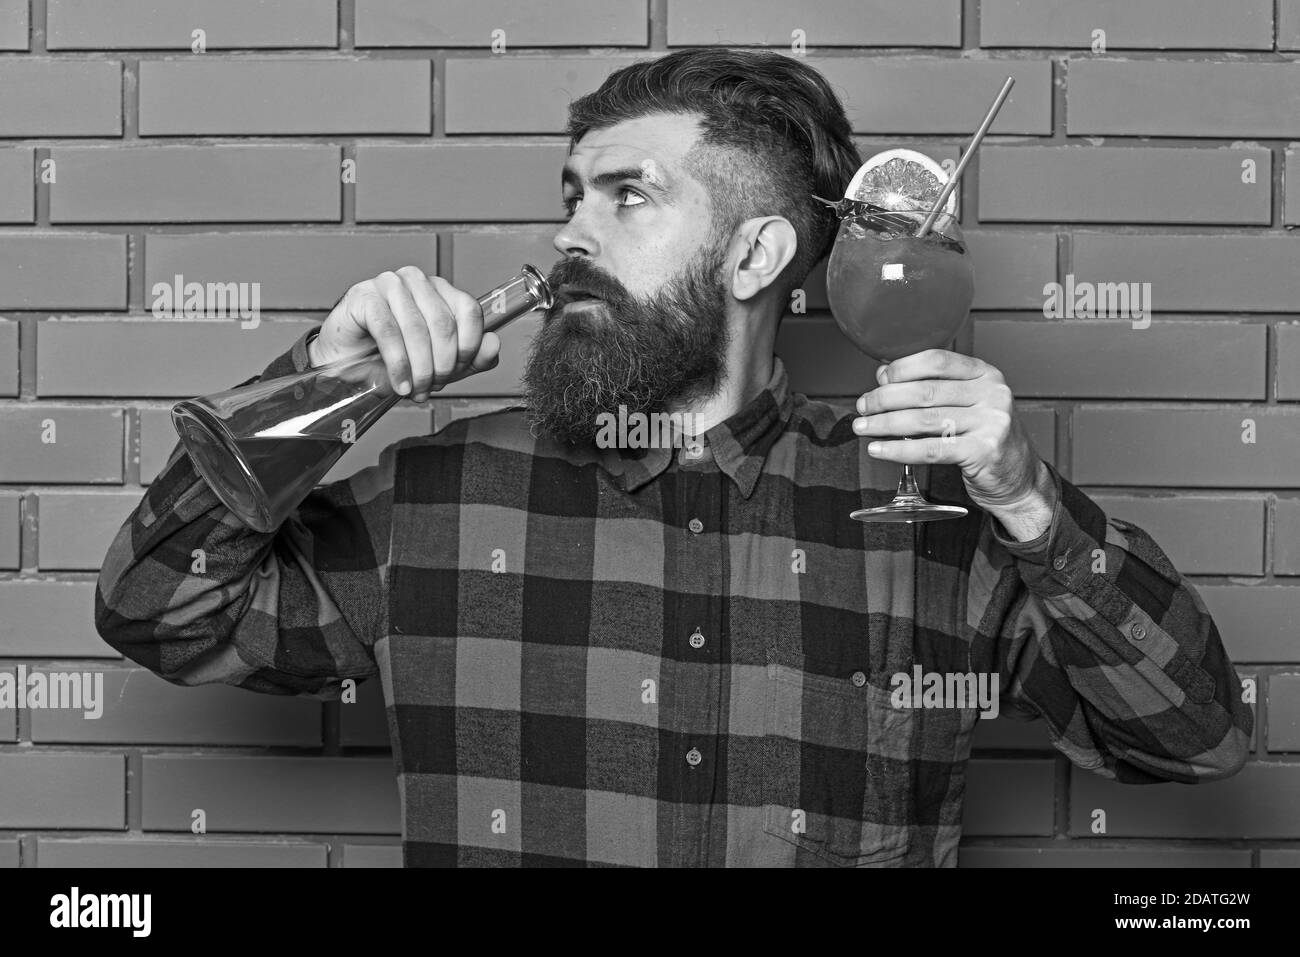 Barman with beard and strict face drinks out of bottle with alcohol. Man holds glass and bottle on brick wall background. Barman or hipster holds drink with orange and straw. Drinking alcohol concept. Stock Photo